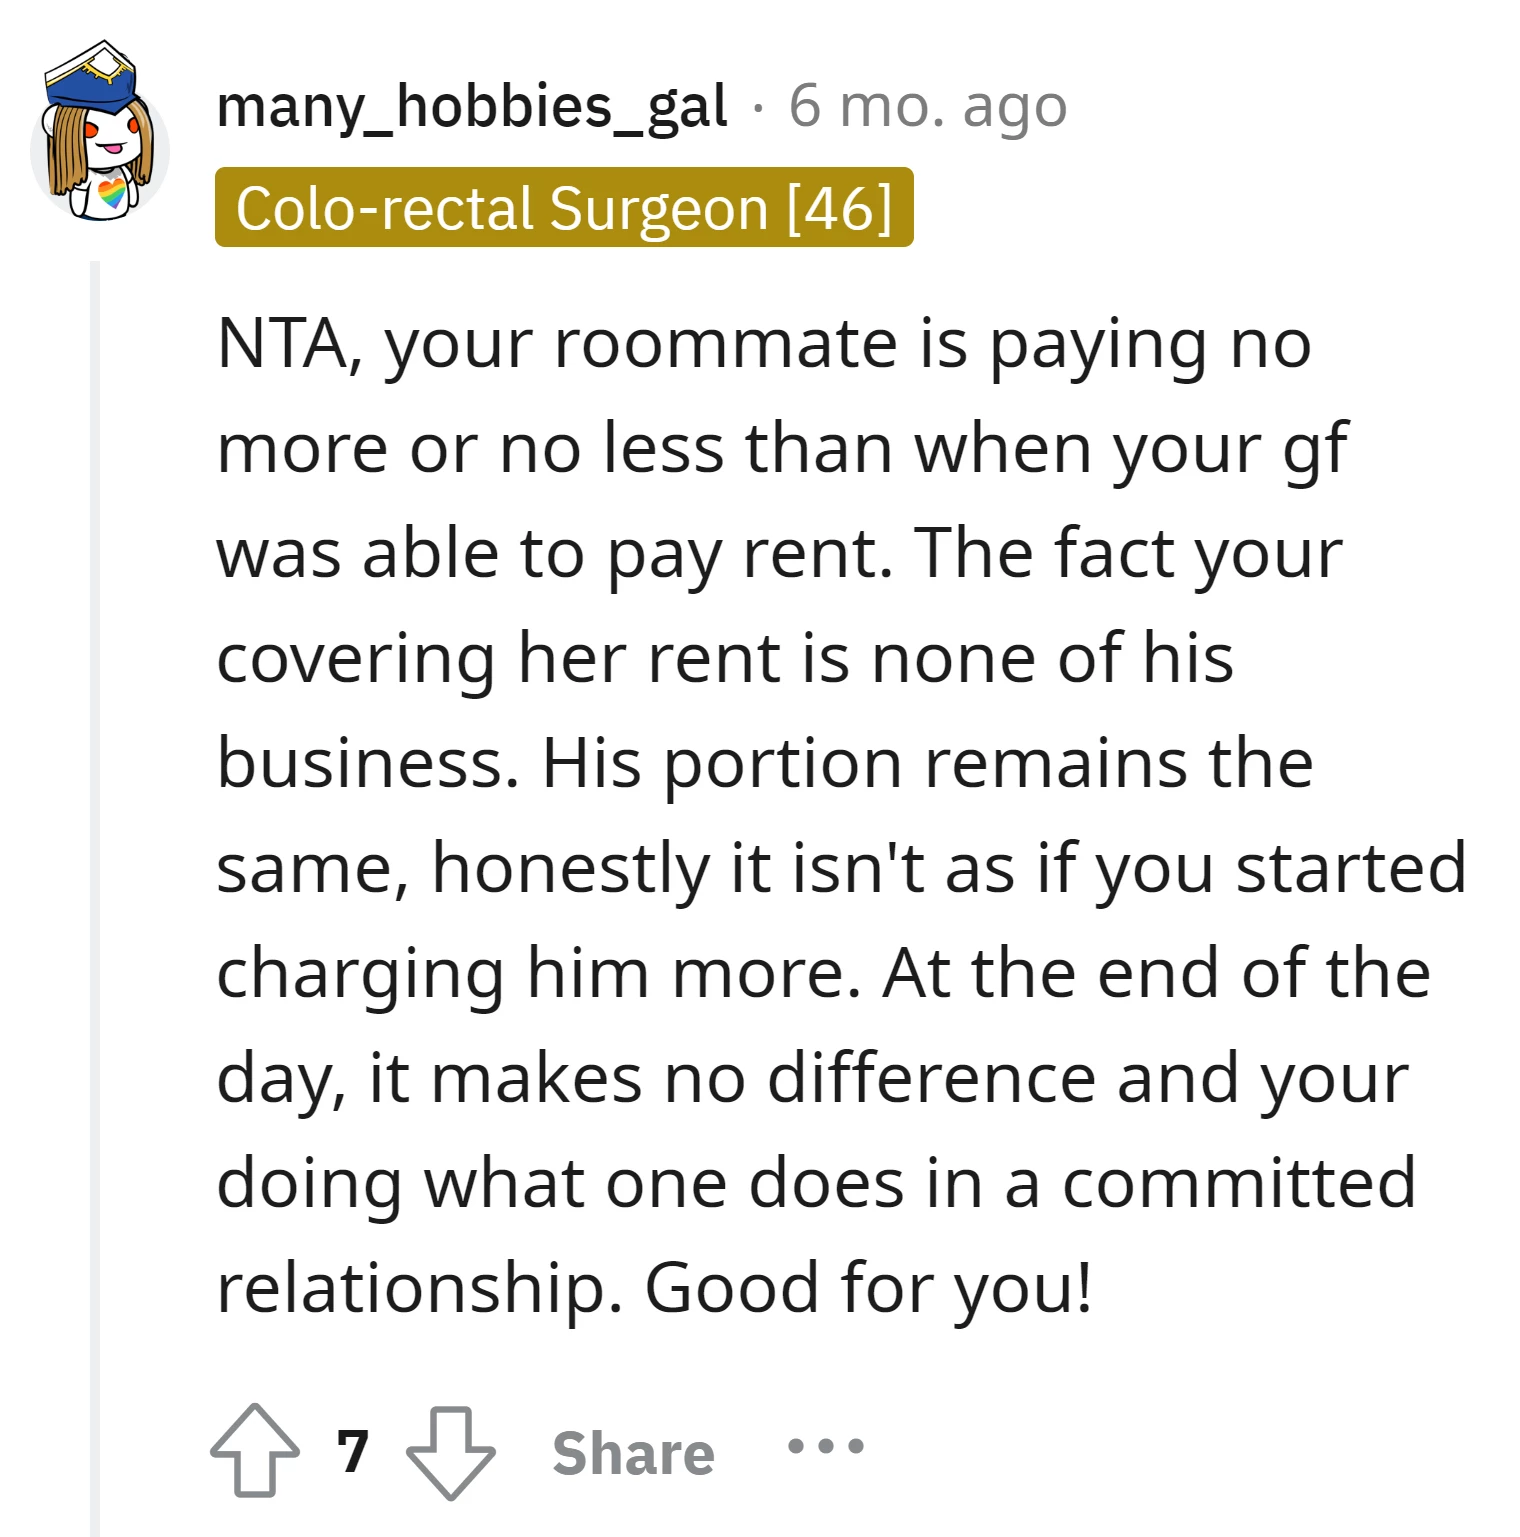 Why the roommate gets upset while his portion of the rent remains unchanged